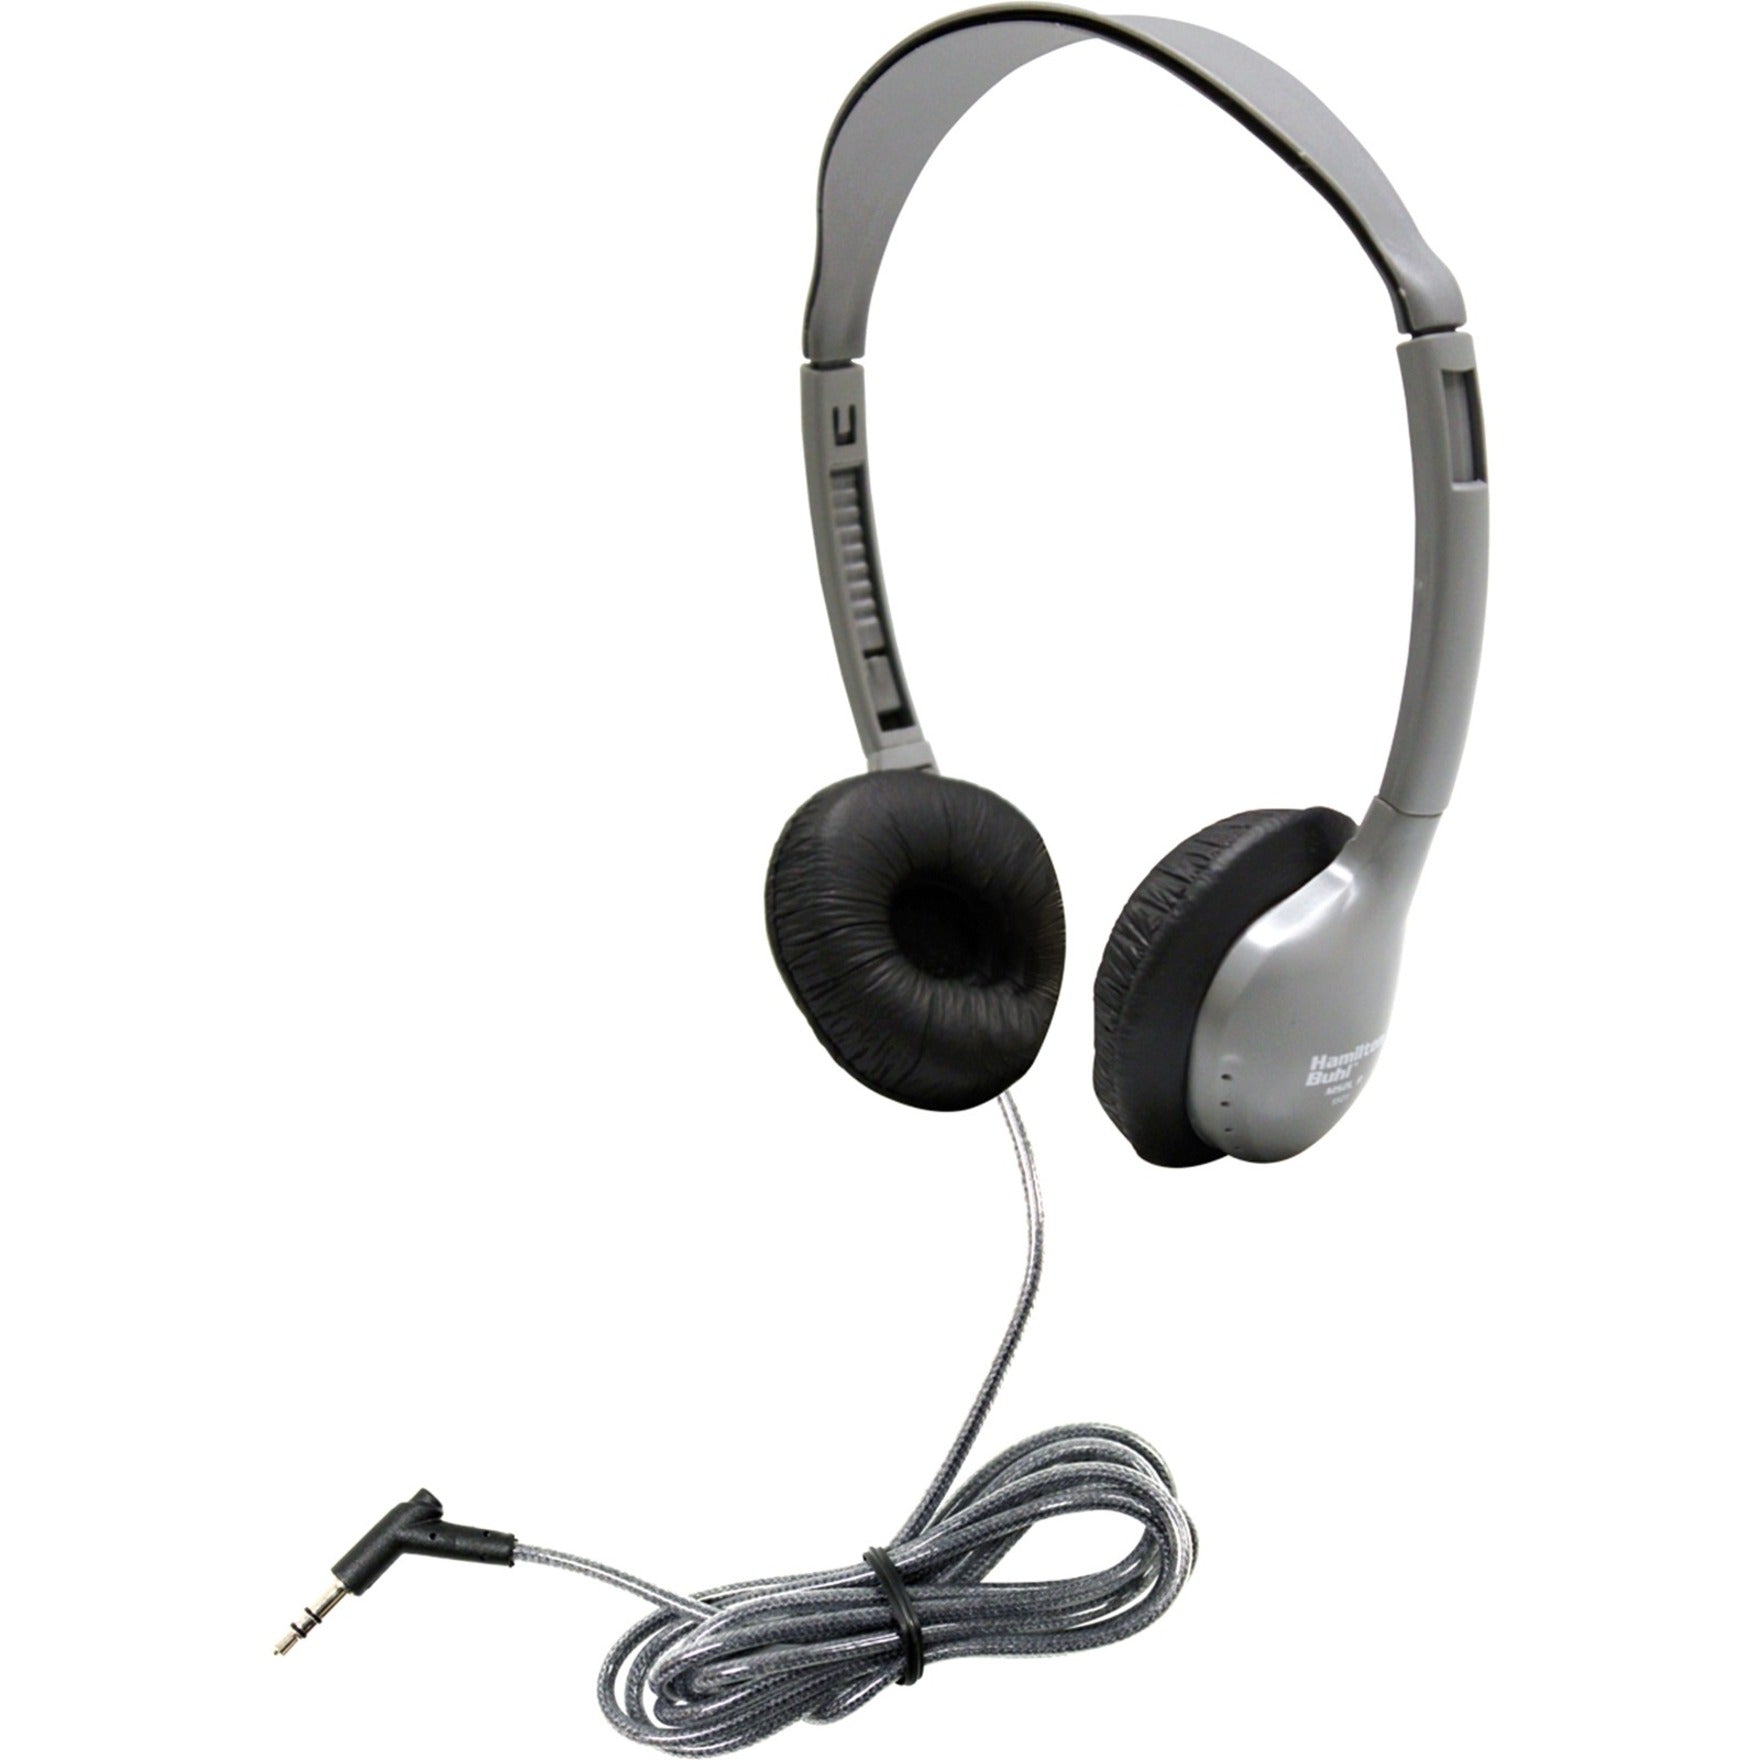 Hamilton Buhl MS2L SchoolMate Personal Stereo Headphone with Leatherette, Rugged, Tangle-free Cable, Durable, Lightweight